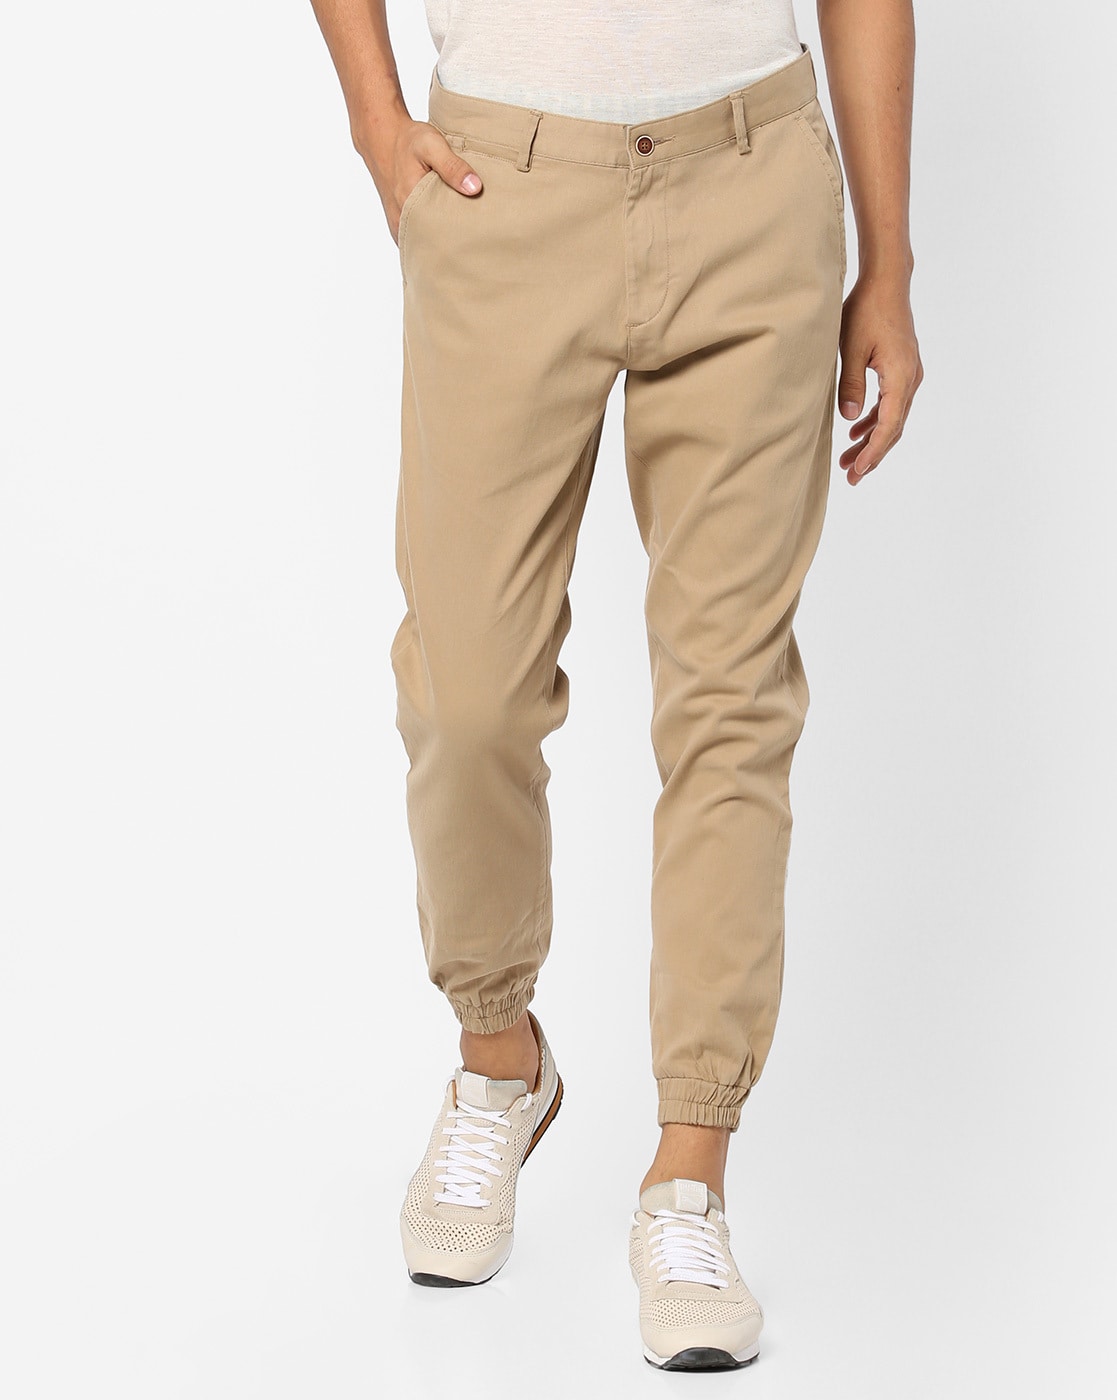 Buy Trackpants Online In India Shop Menswear Track Pants In India At Be  Ziddi